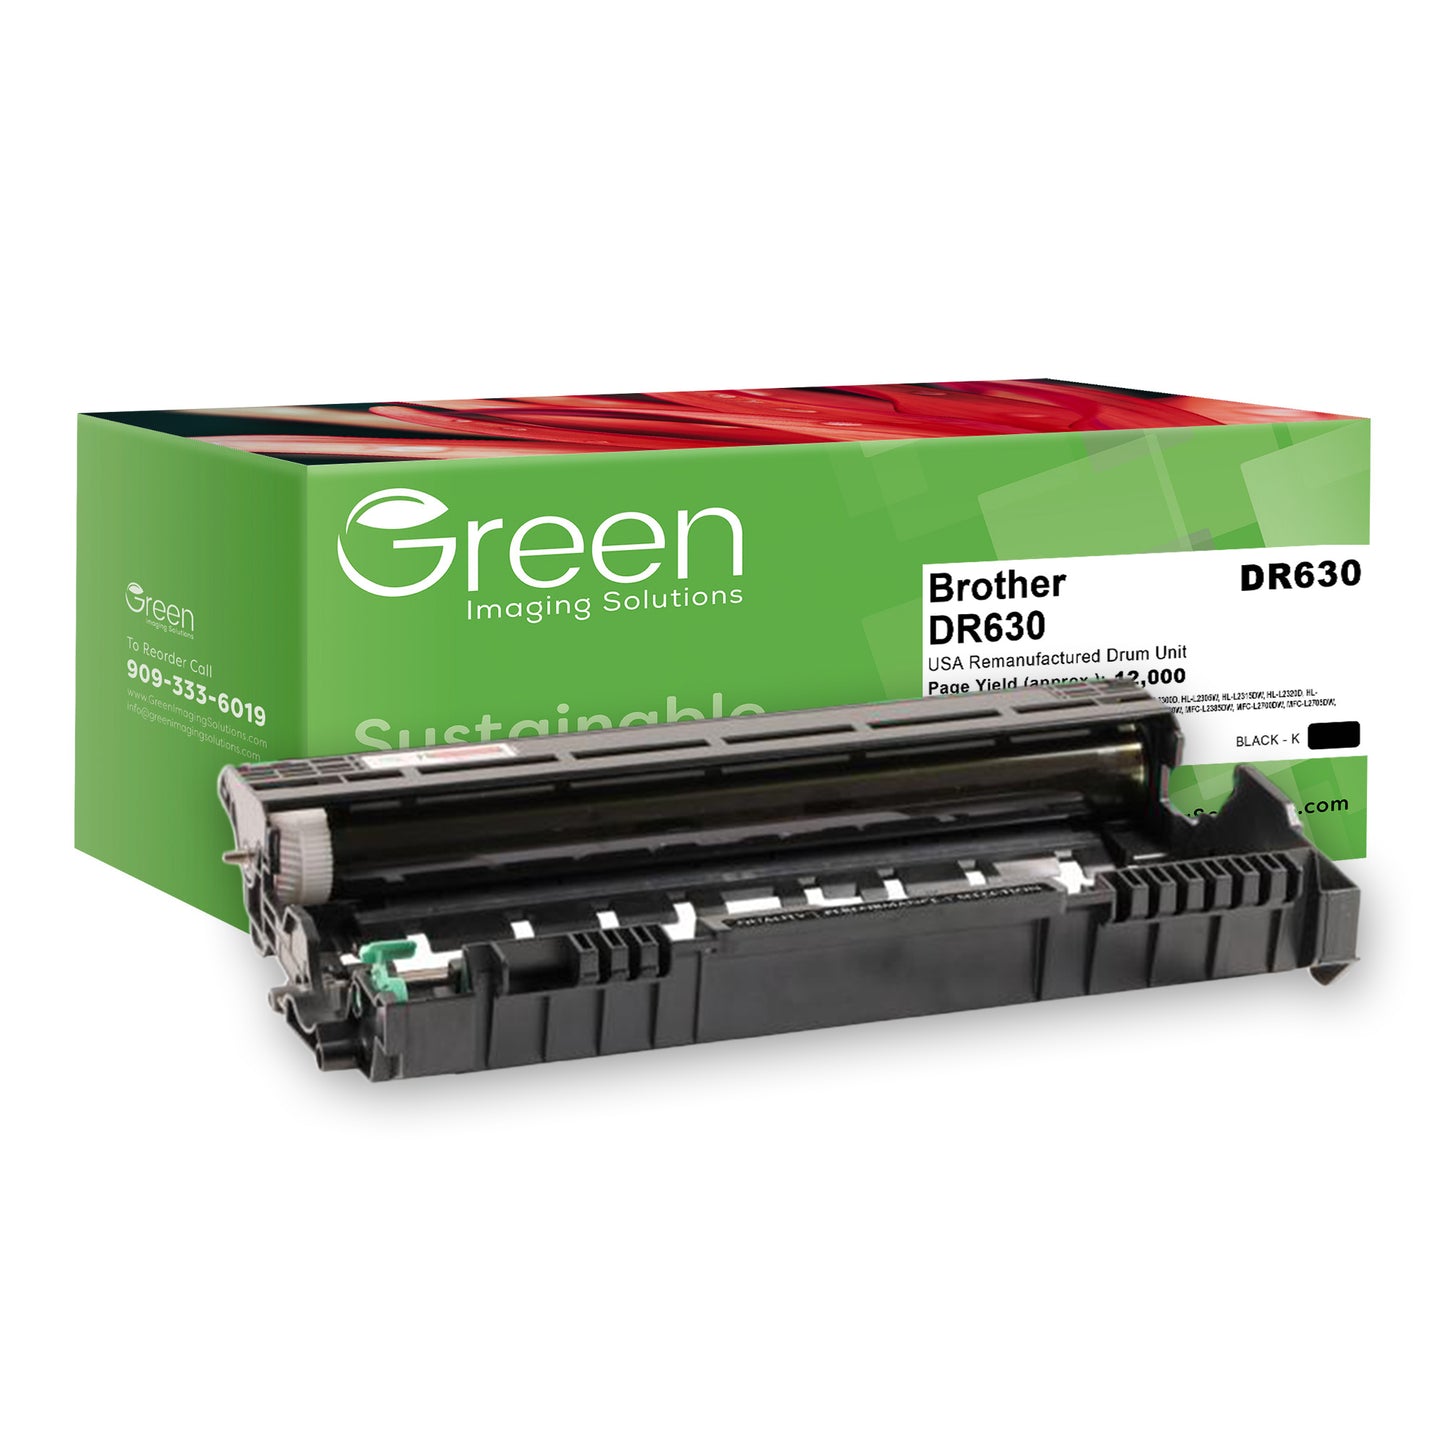 Green Imaging Solutions USA Remanufactured Drum Unit for Brother DR630